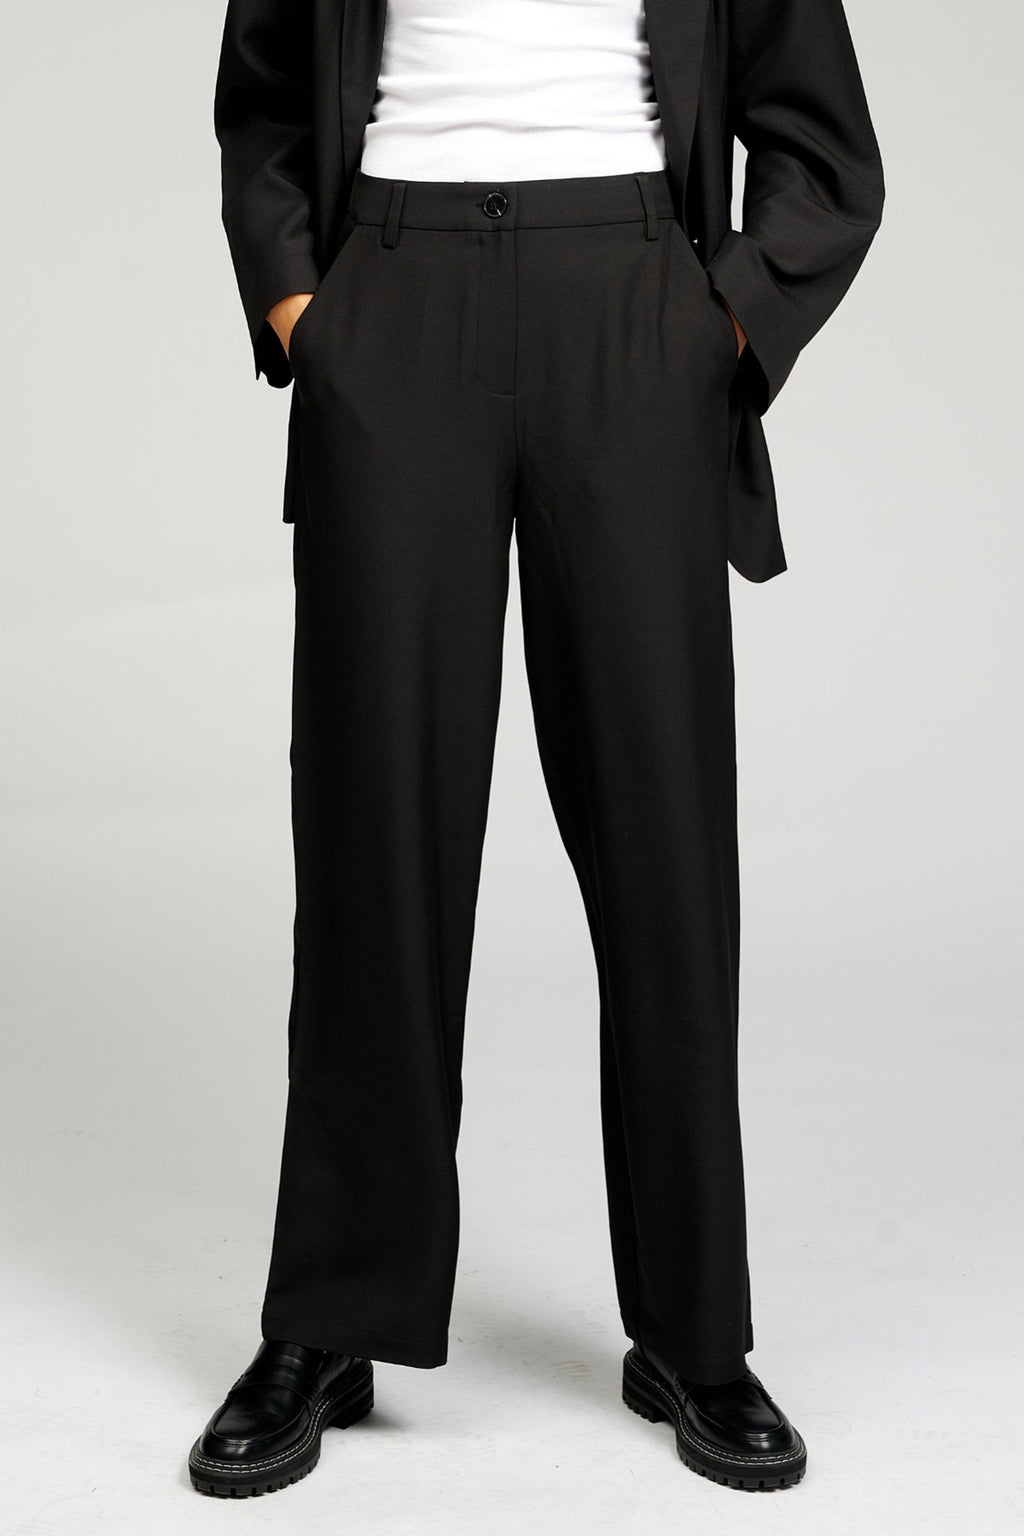 Oversized Suit (Black) - Package Deal